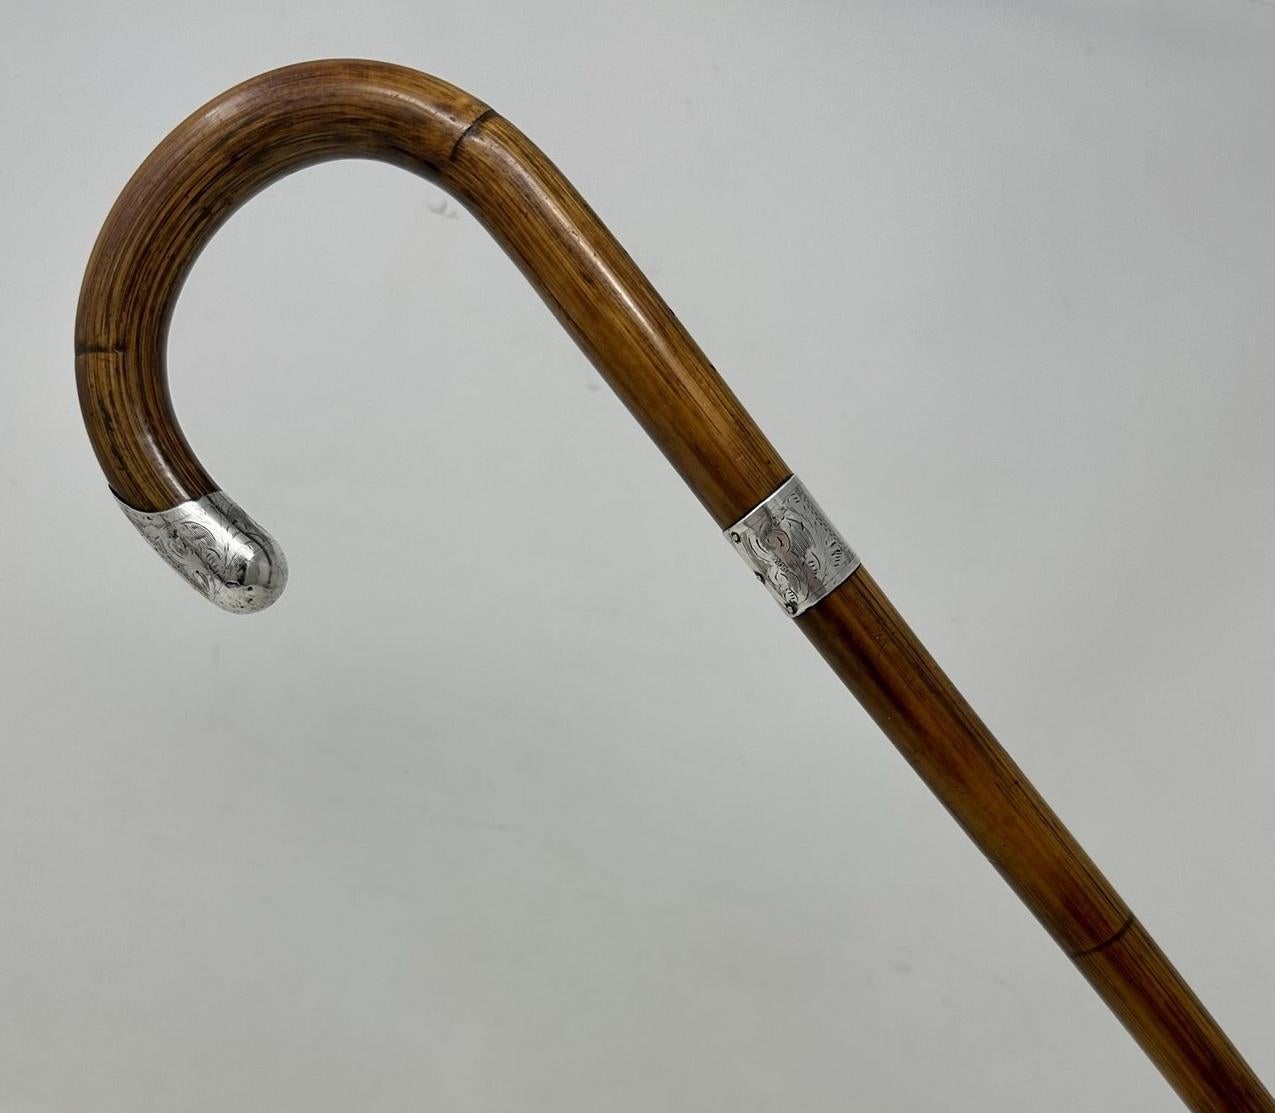 Stylish well grained Stepped Partridge Wood ladies or gentleman's walking stick with crook handle and ornate chased sterling silver collar and mount, first Quarter of the 20th Century. 

Partridge Wood is a strong tropical wood from the Western